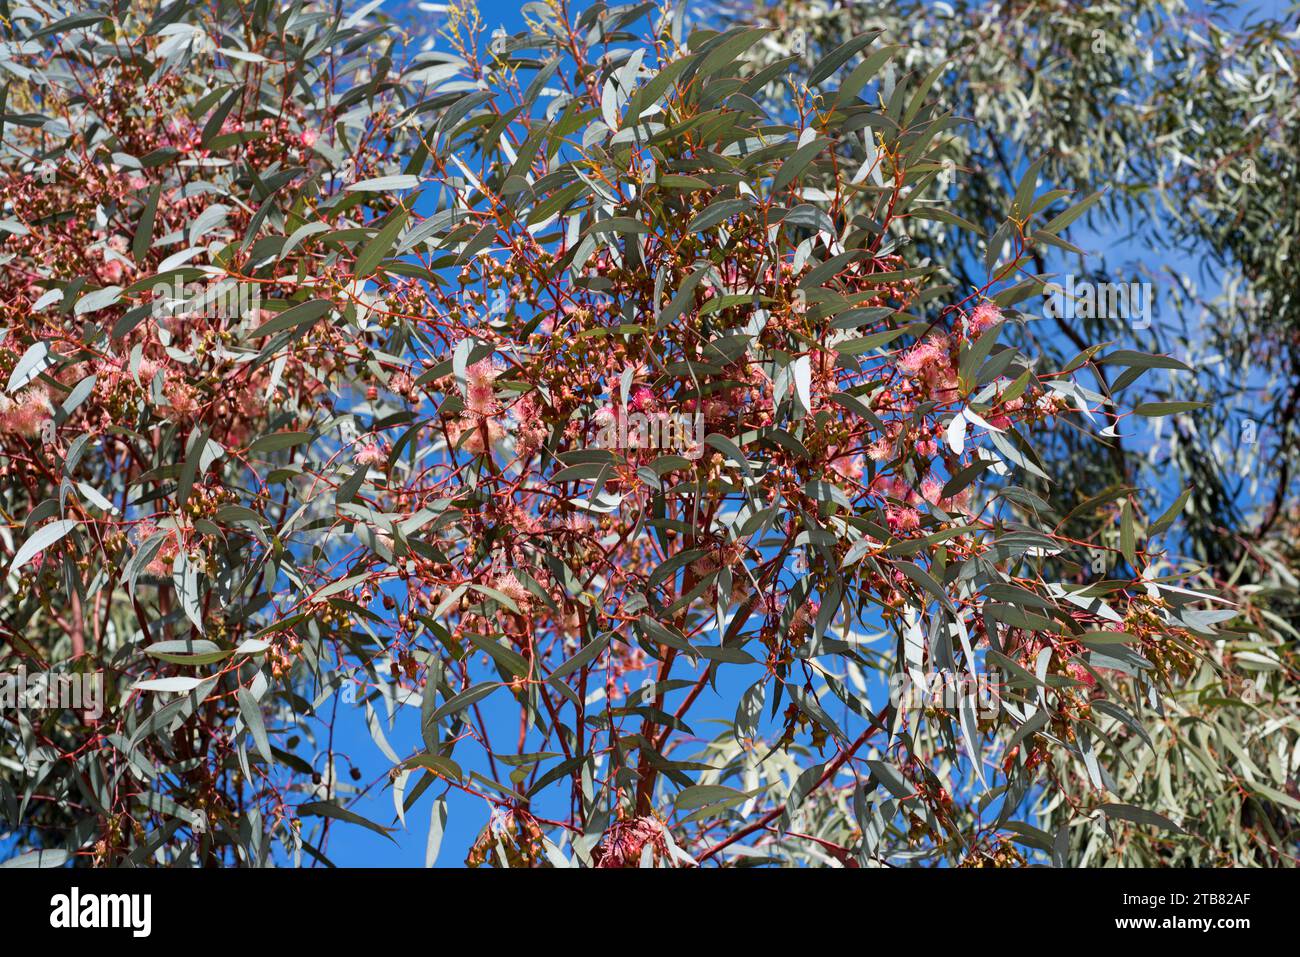 Coral gum or Coolgardie gum (Eucalyptus torquata) is a small tree endemic to western Australia. Flowers and leaves detail. Stock Photo